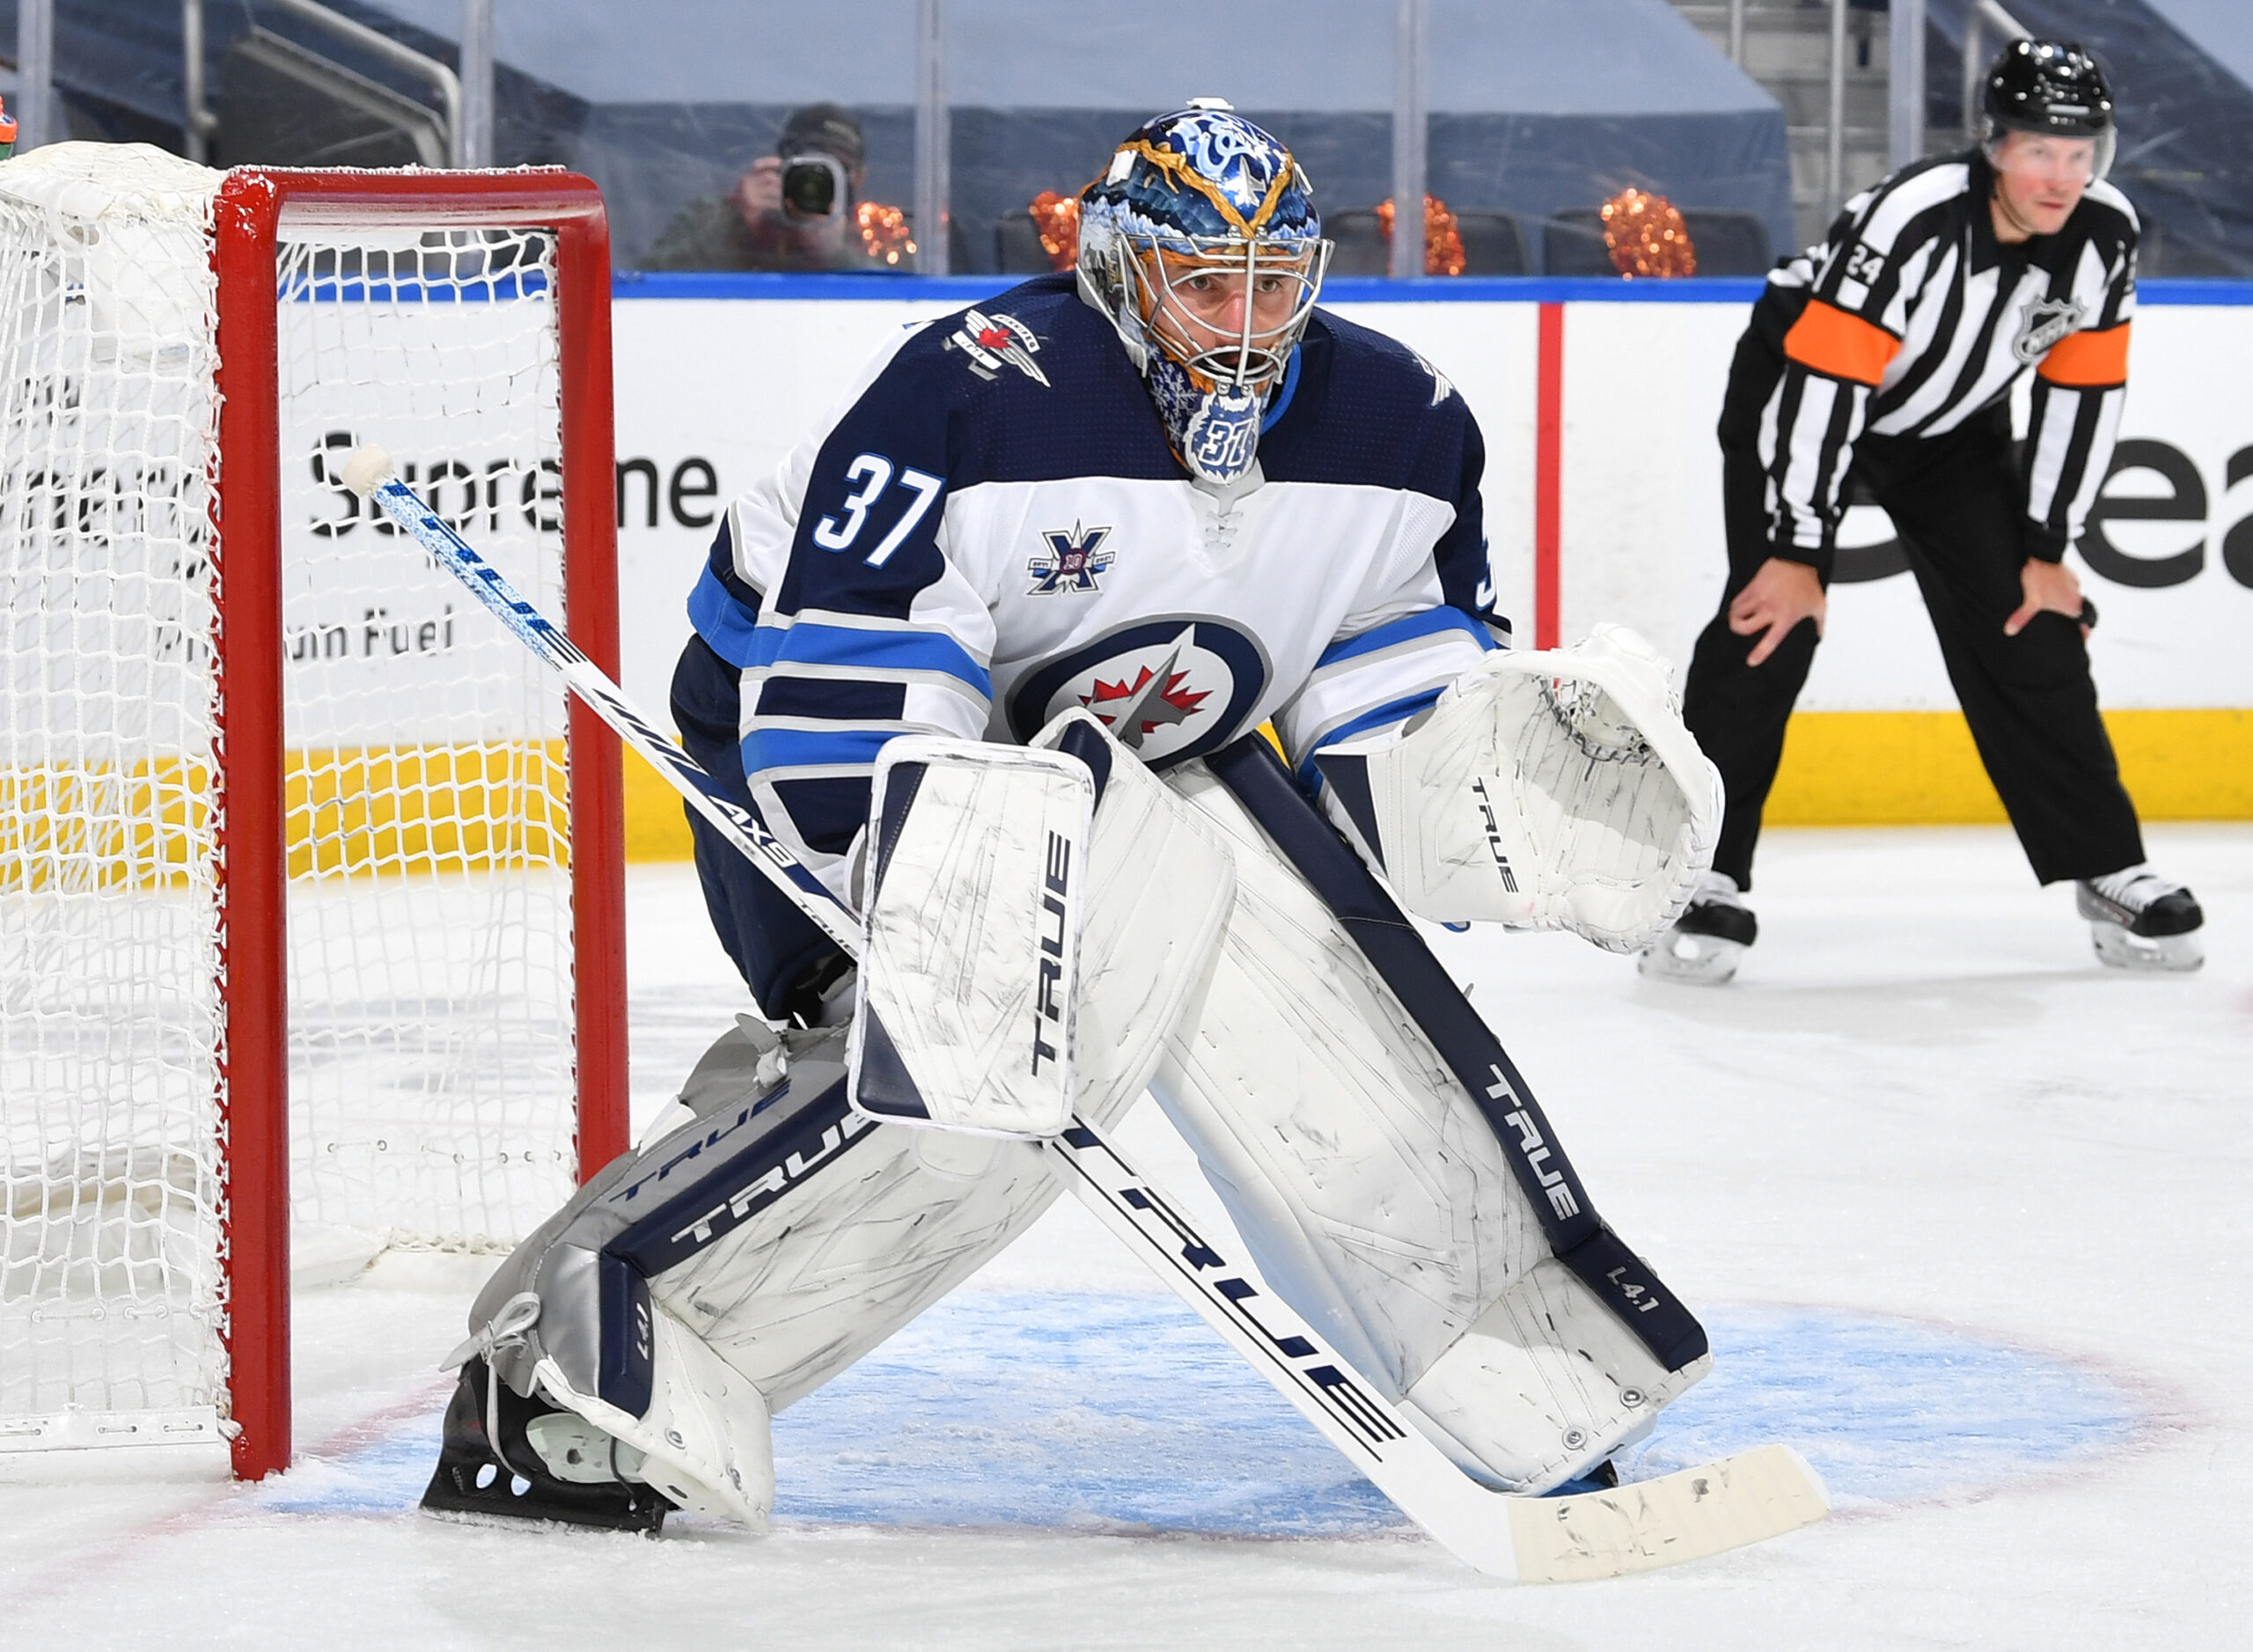 https://s3951.pcdn.co/wp-content/uploads/2021/05/Connor-Hellebuyck-Jets-1-scaled.jpg